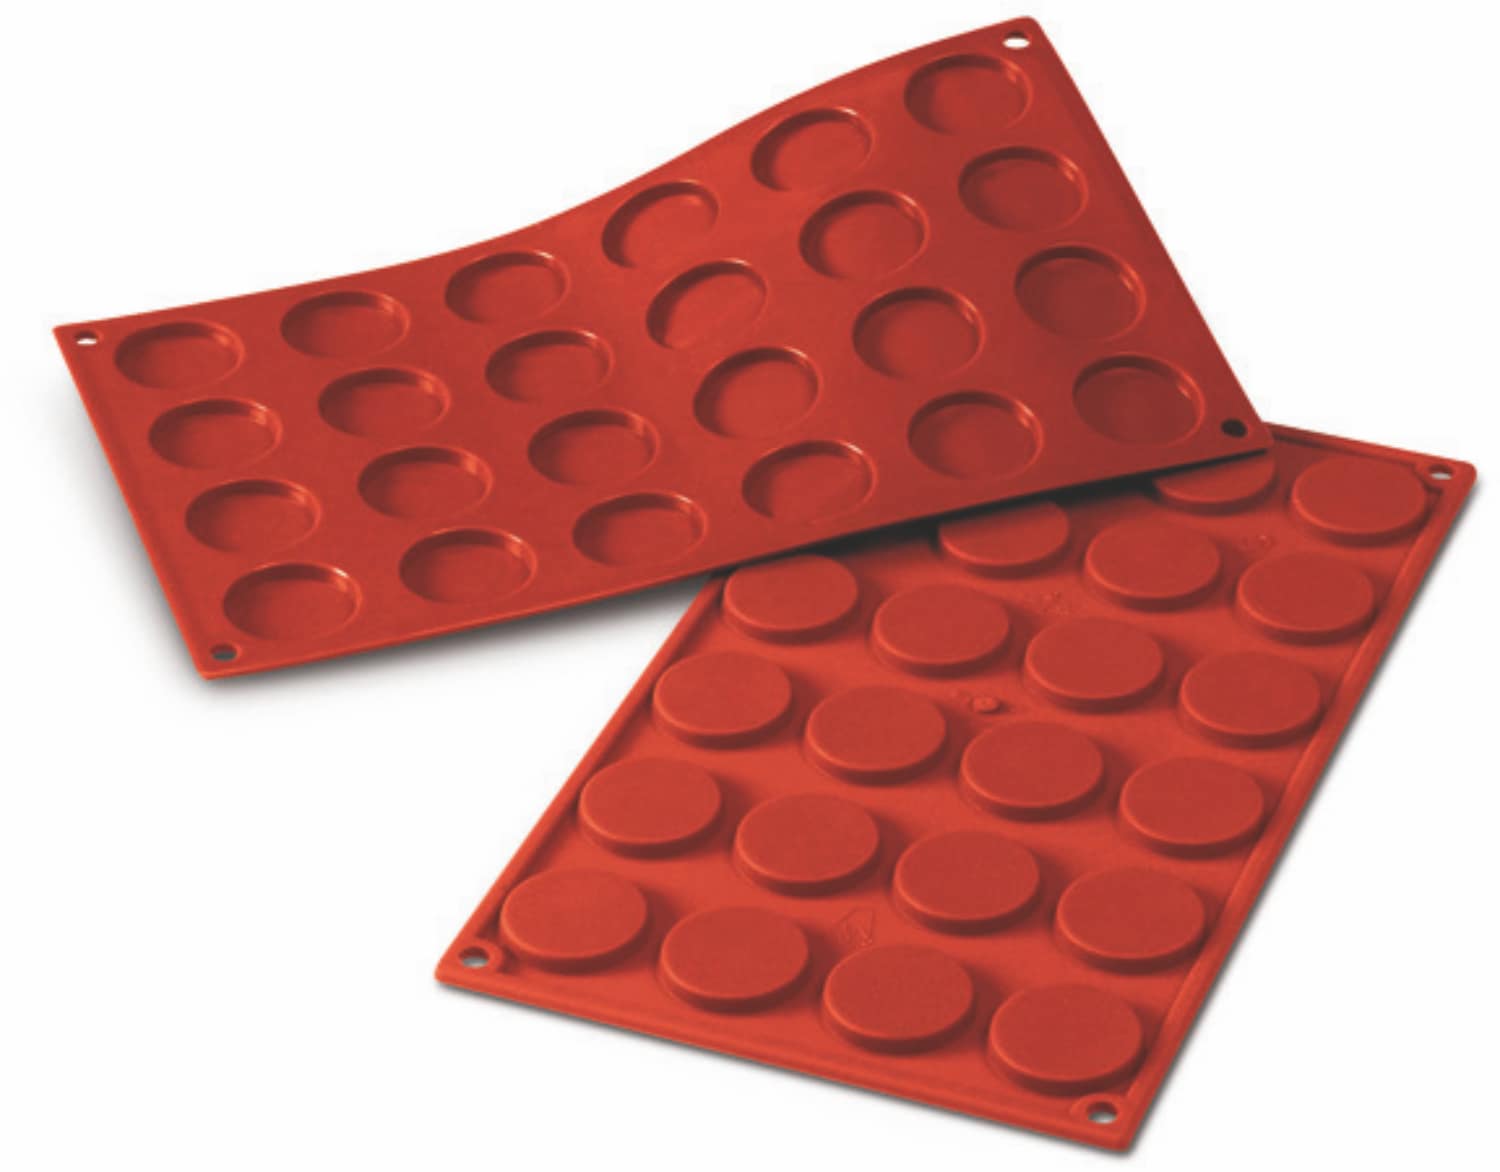 Silicone baking moulds "Florentines" 300 x 175 mm